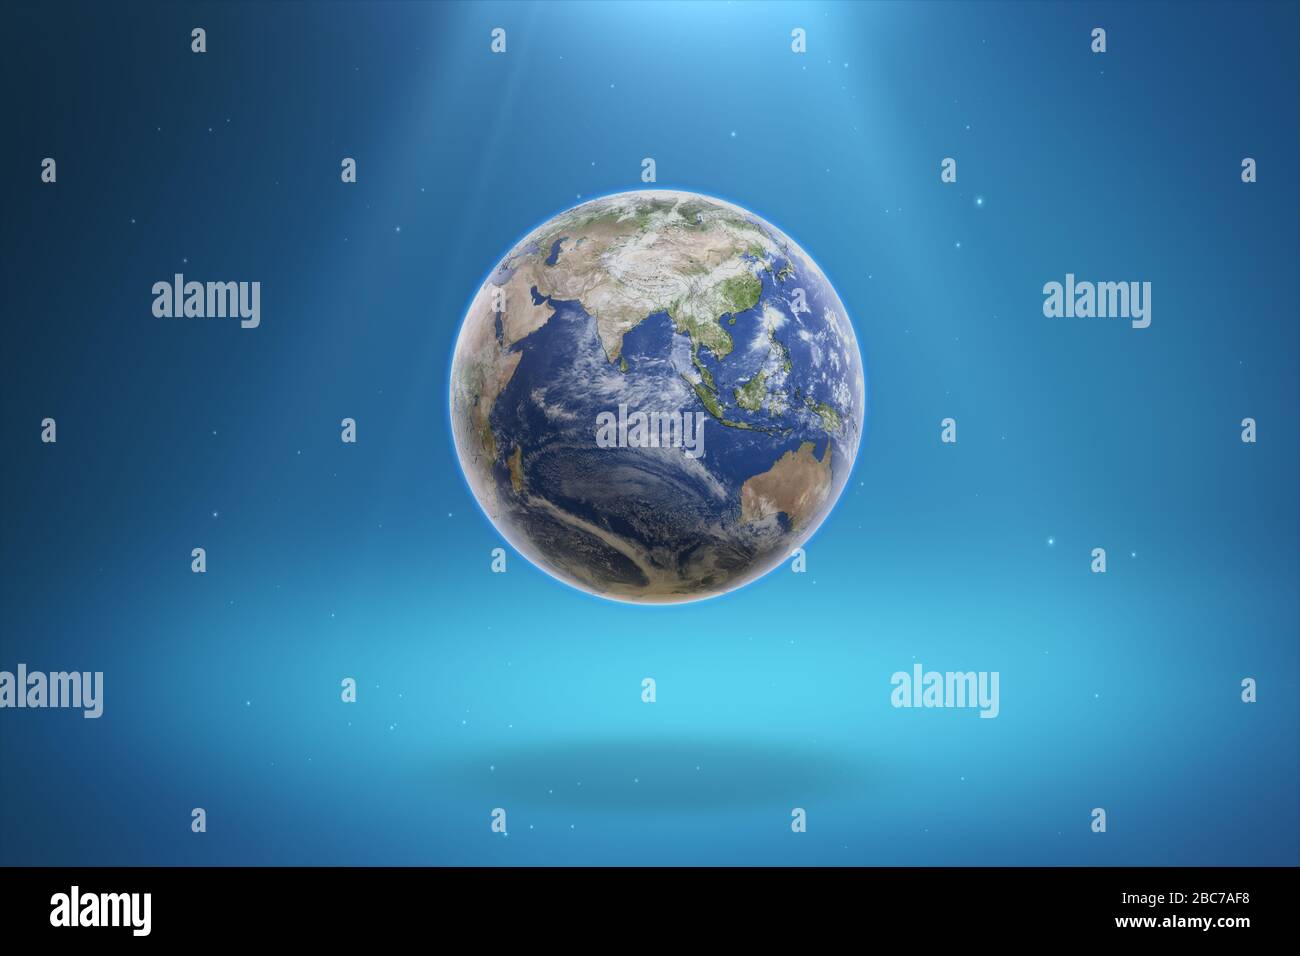 Earth Planet with Light Rays on Blue Gradient Background. 3D Illustration. Stock Photo